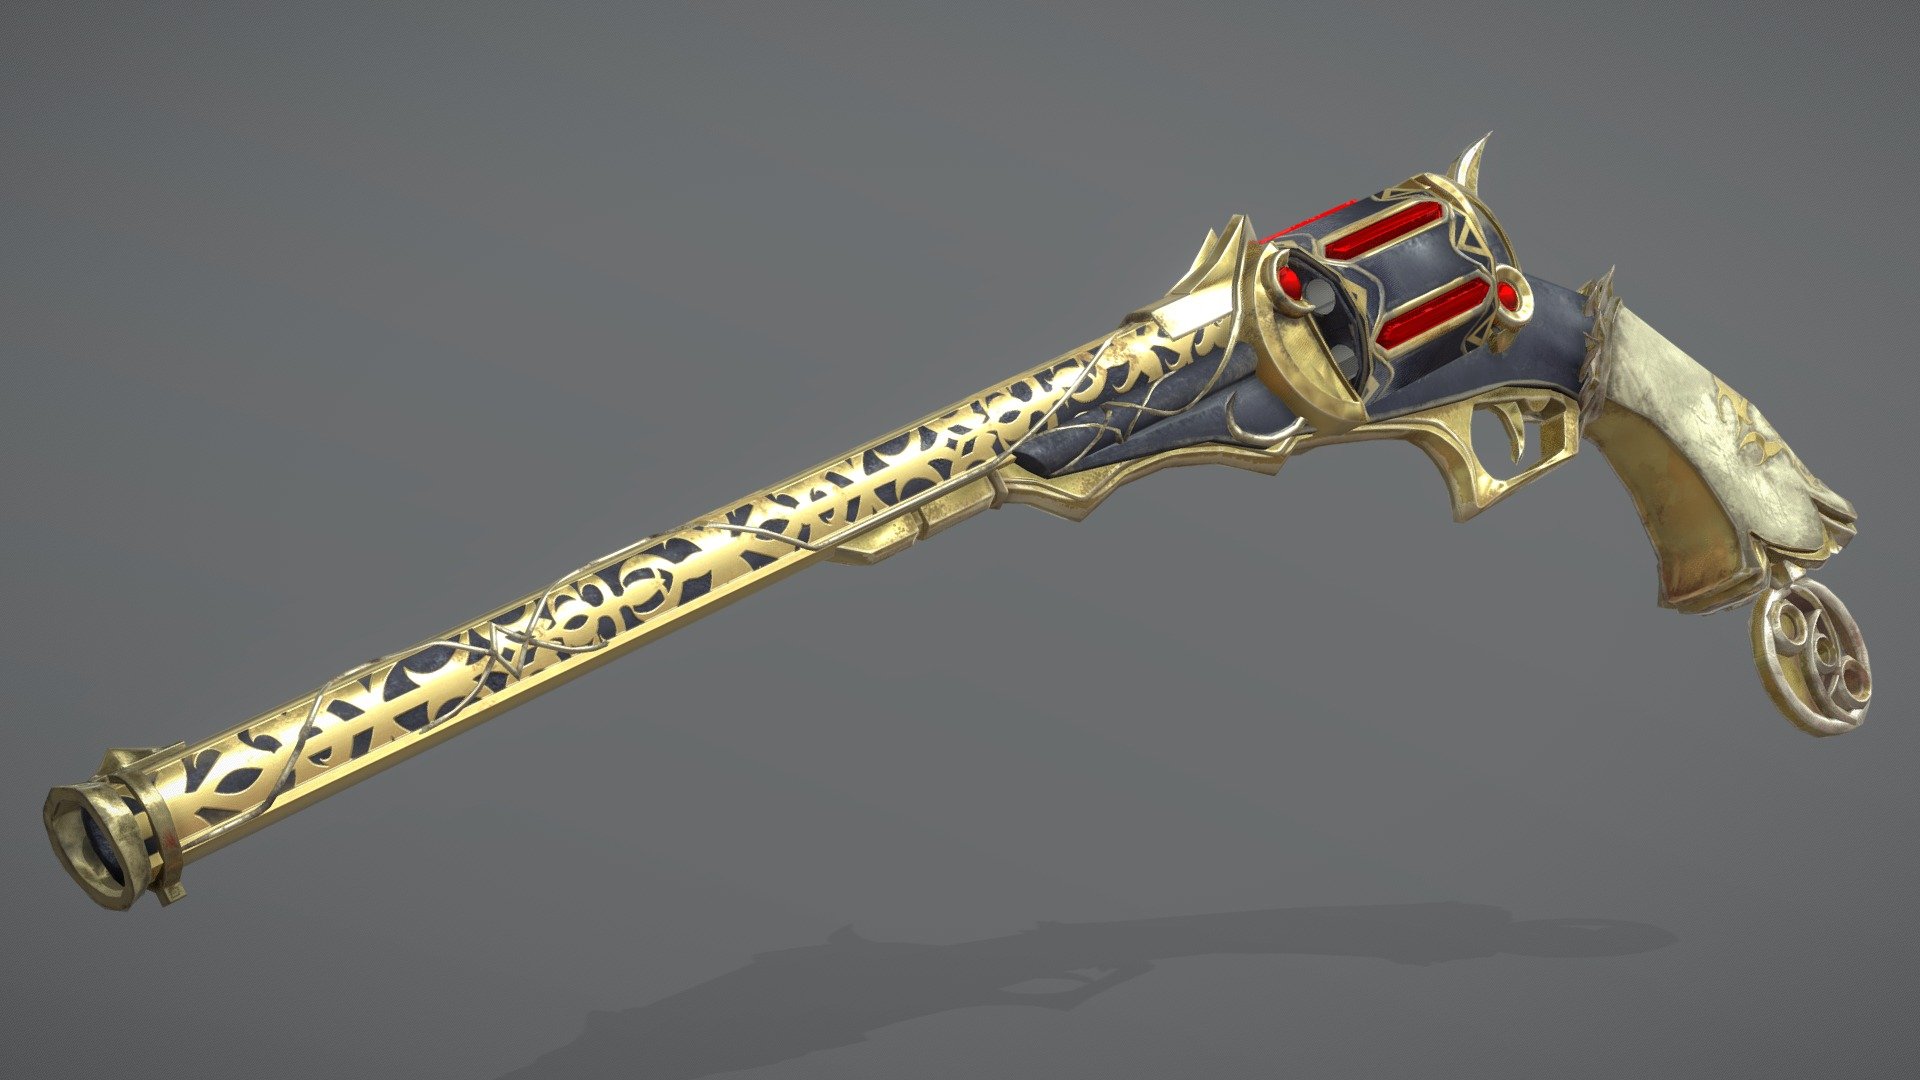 I was given a week to finish a realistic asset with textures, that shows some signs of usage.
And as a huge Bayonetta fan, I decided to create a model of Rosas weapons, Unforgiven. 
I used 3ds Max and Substance Painter 3d model